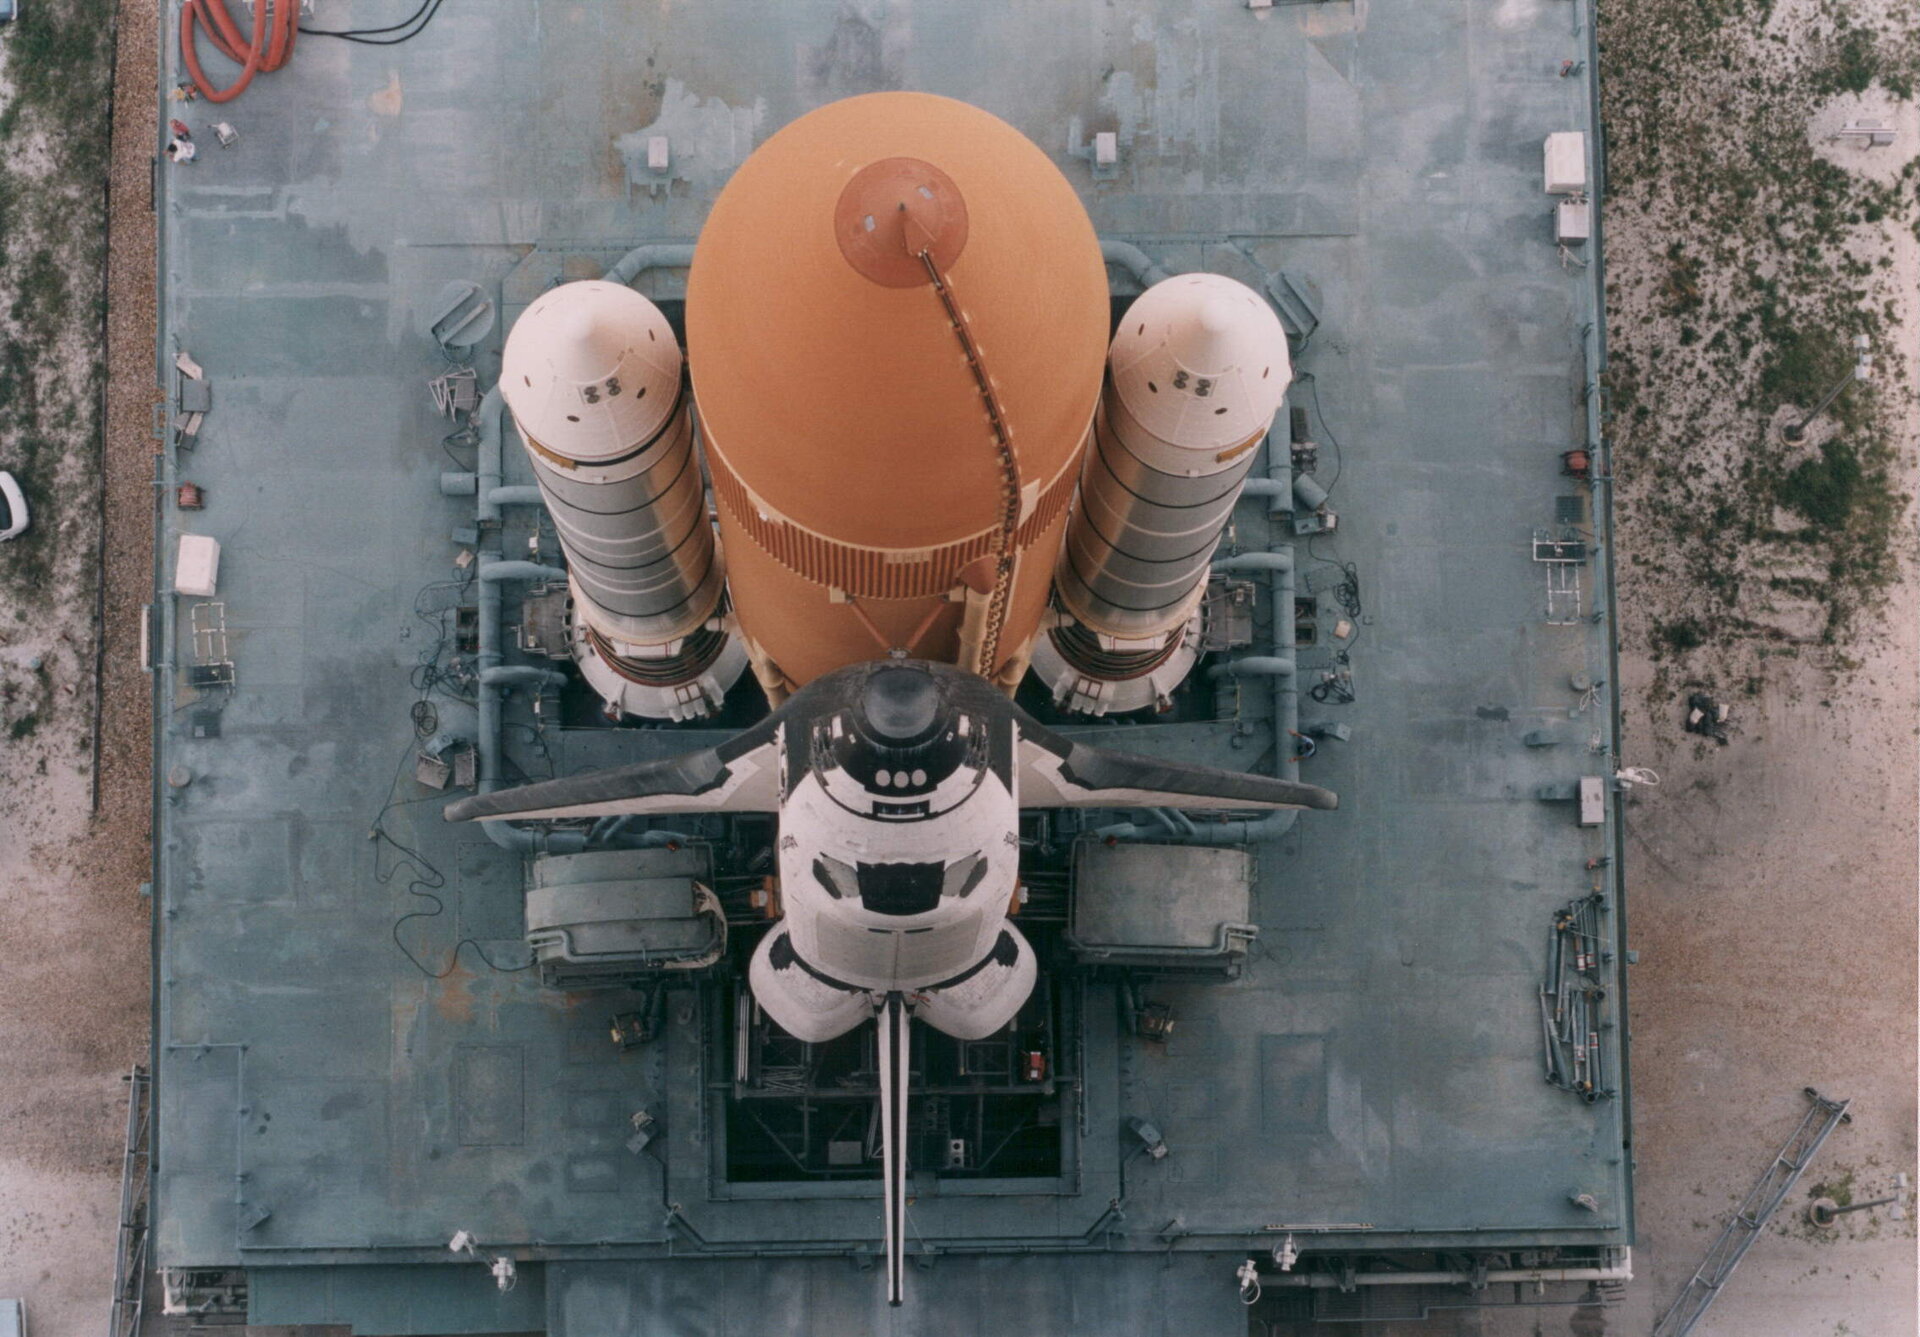 STS-79 Atlantis atop the mobile launcher